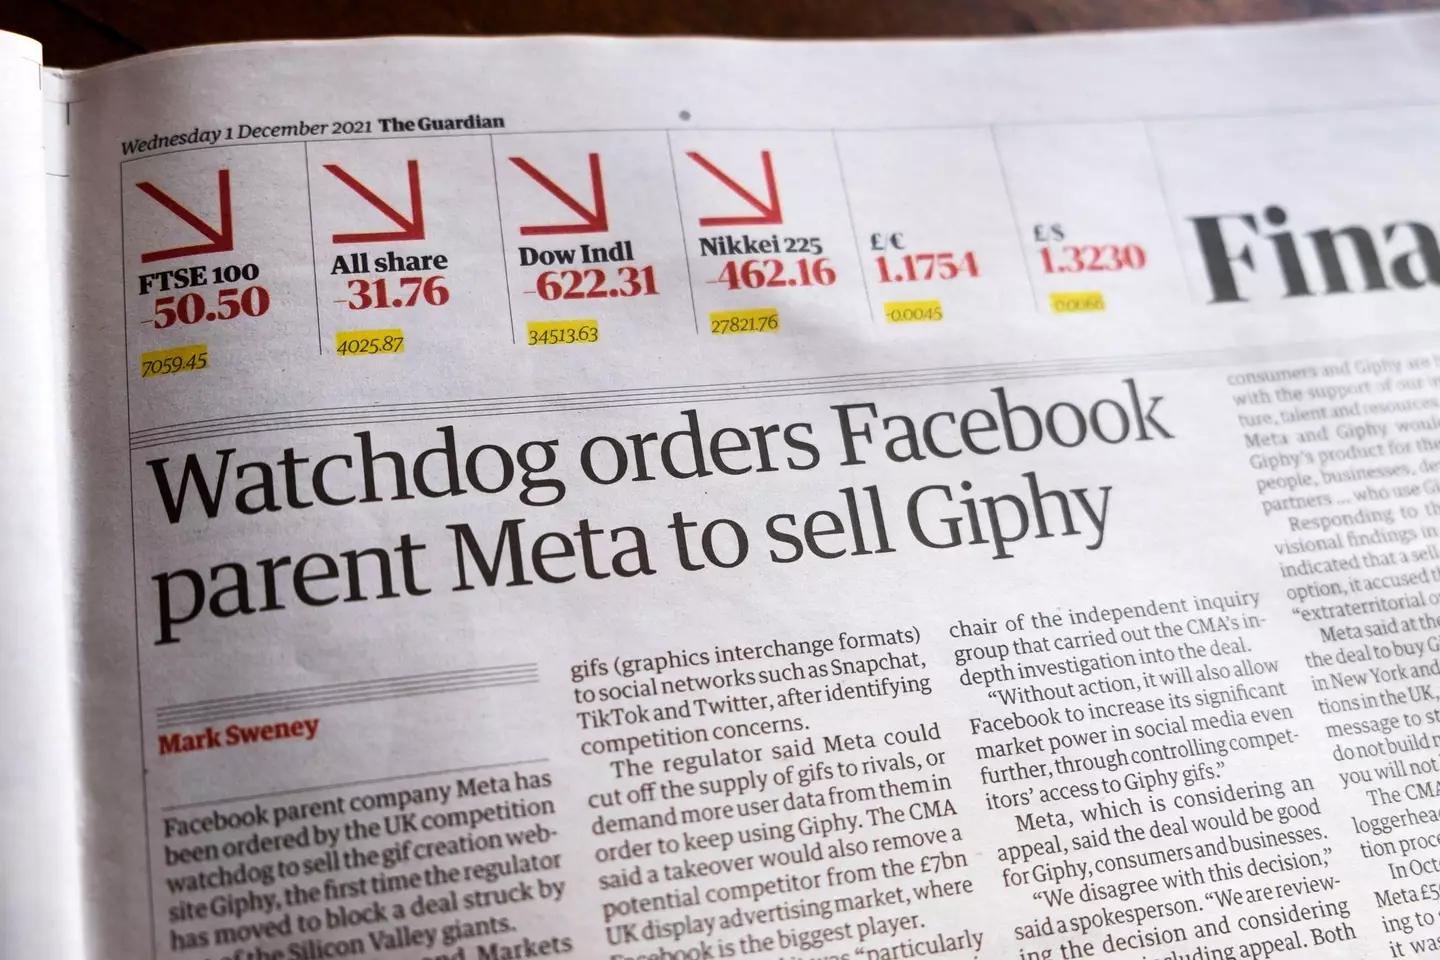 Facebook had been ordered to sell Giphy late last year.